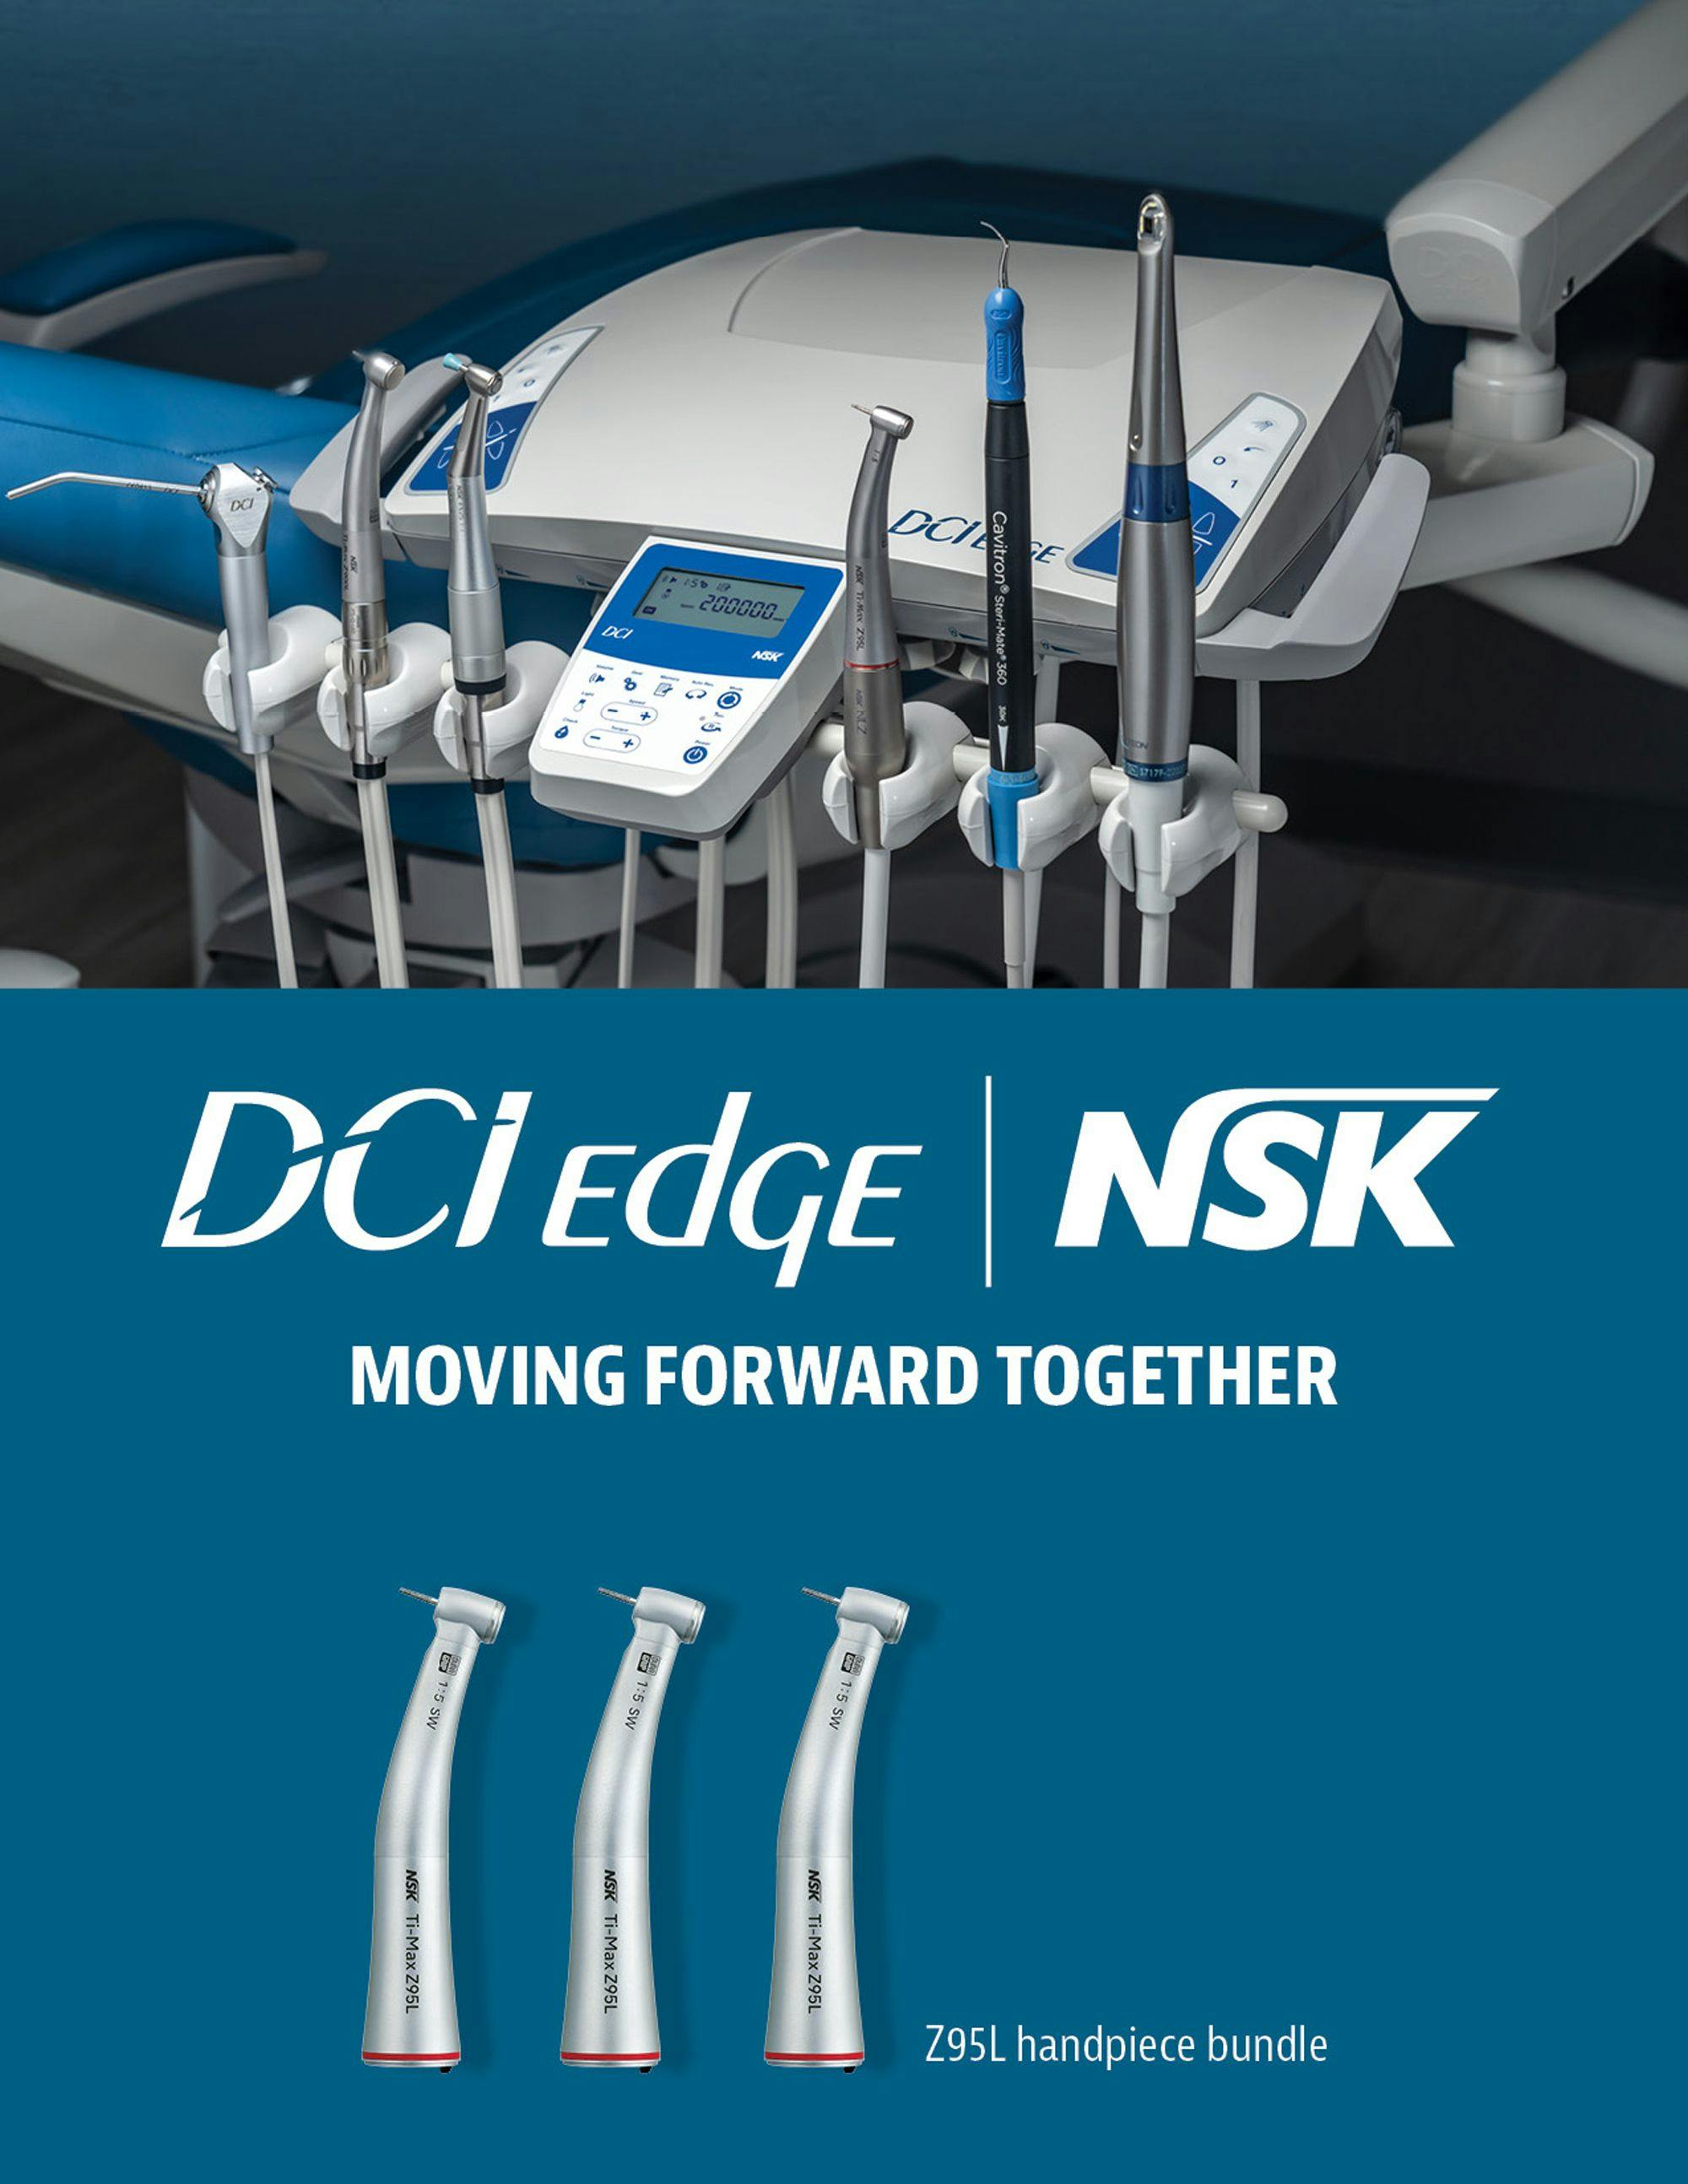 DCI Partners with NSK for Handpiece Bundles